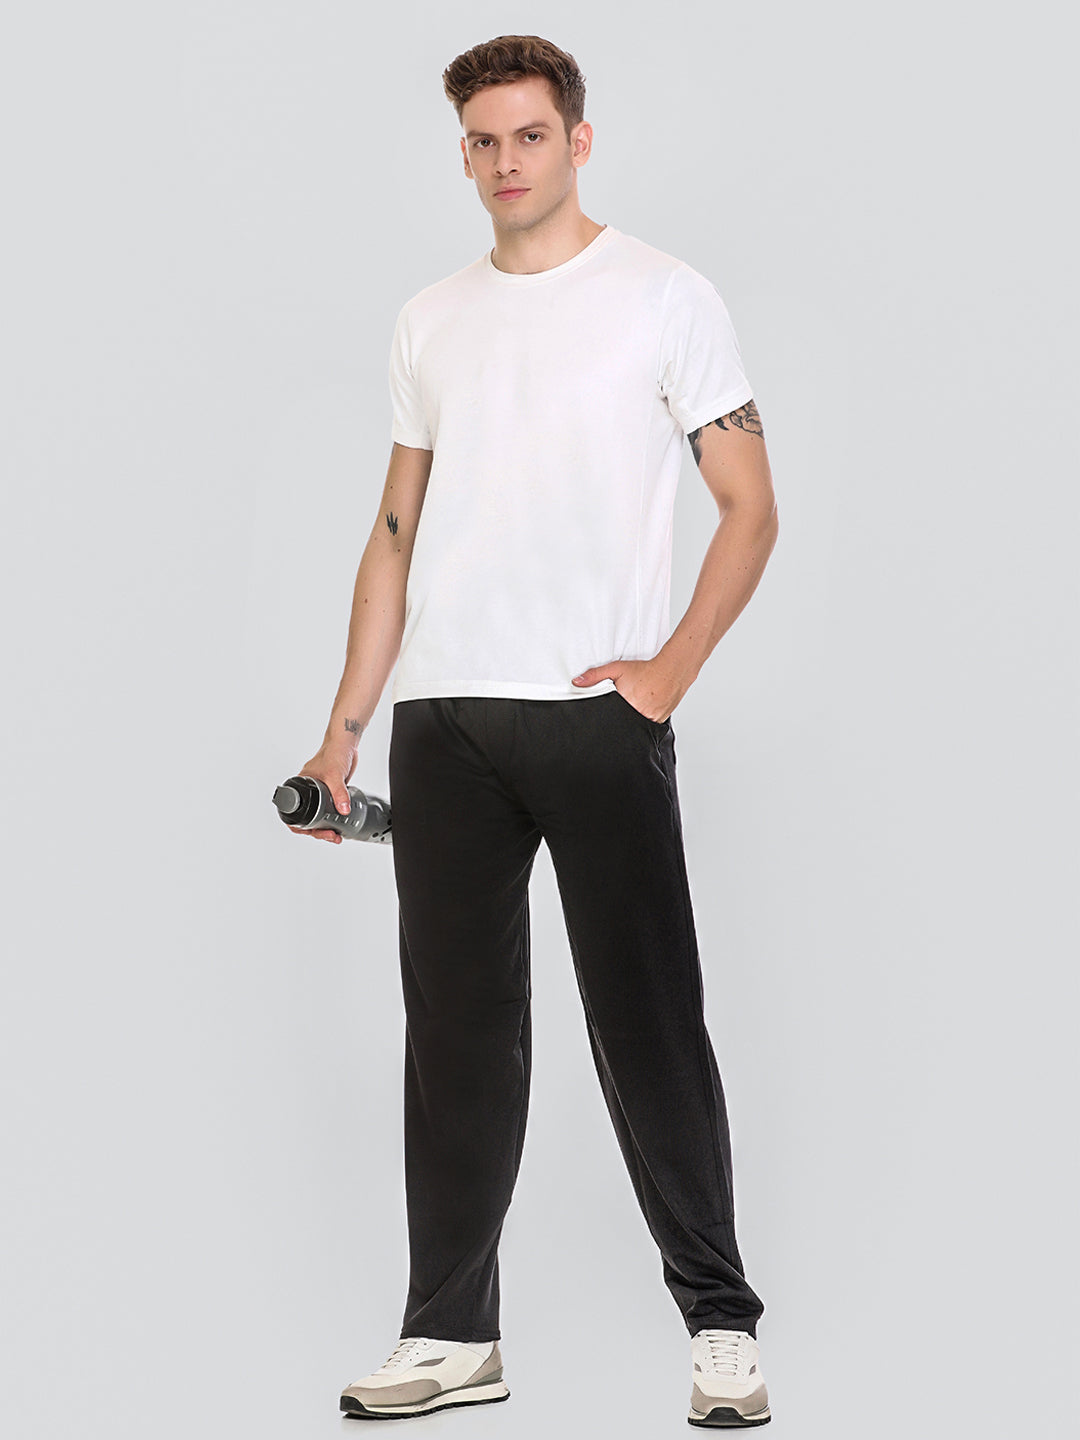 Comfy Black Cotton Jinxer Regular Fit Sports Lowers For Men At Best Prices Online In India